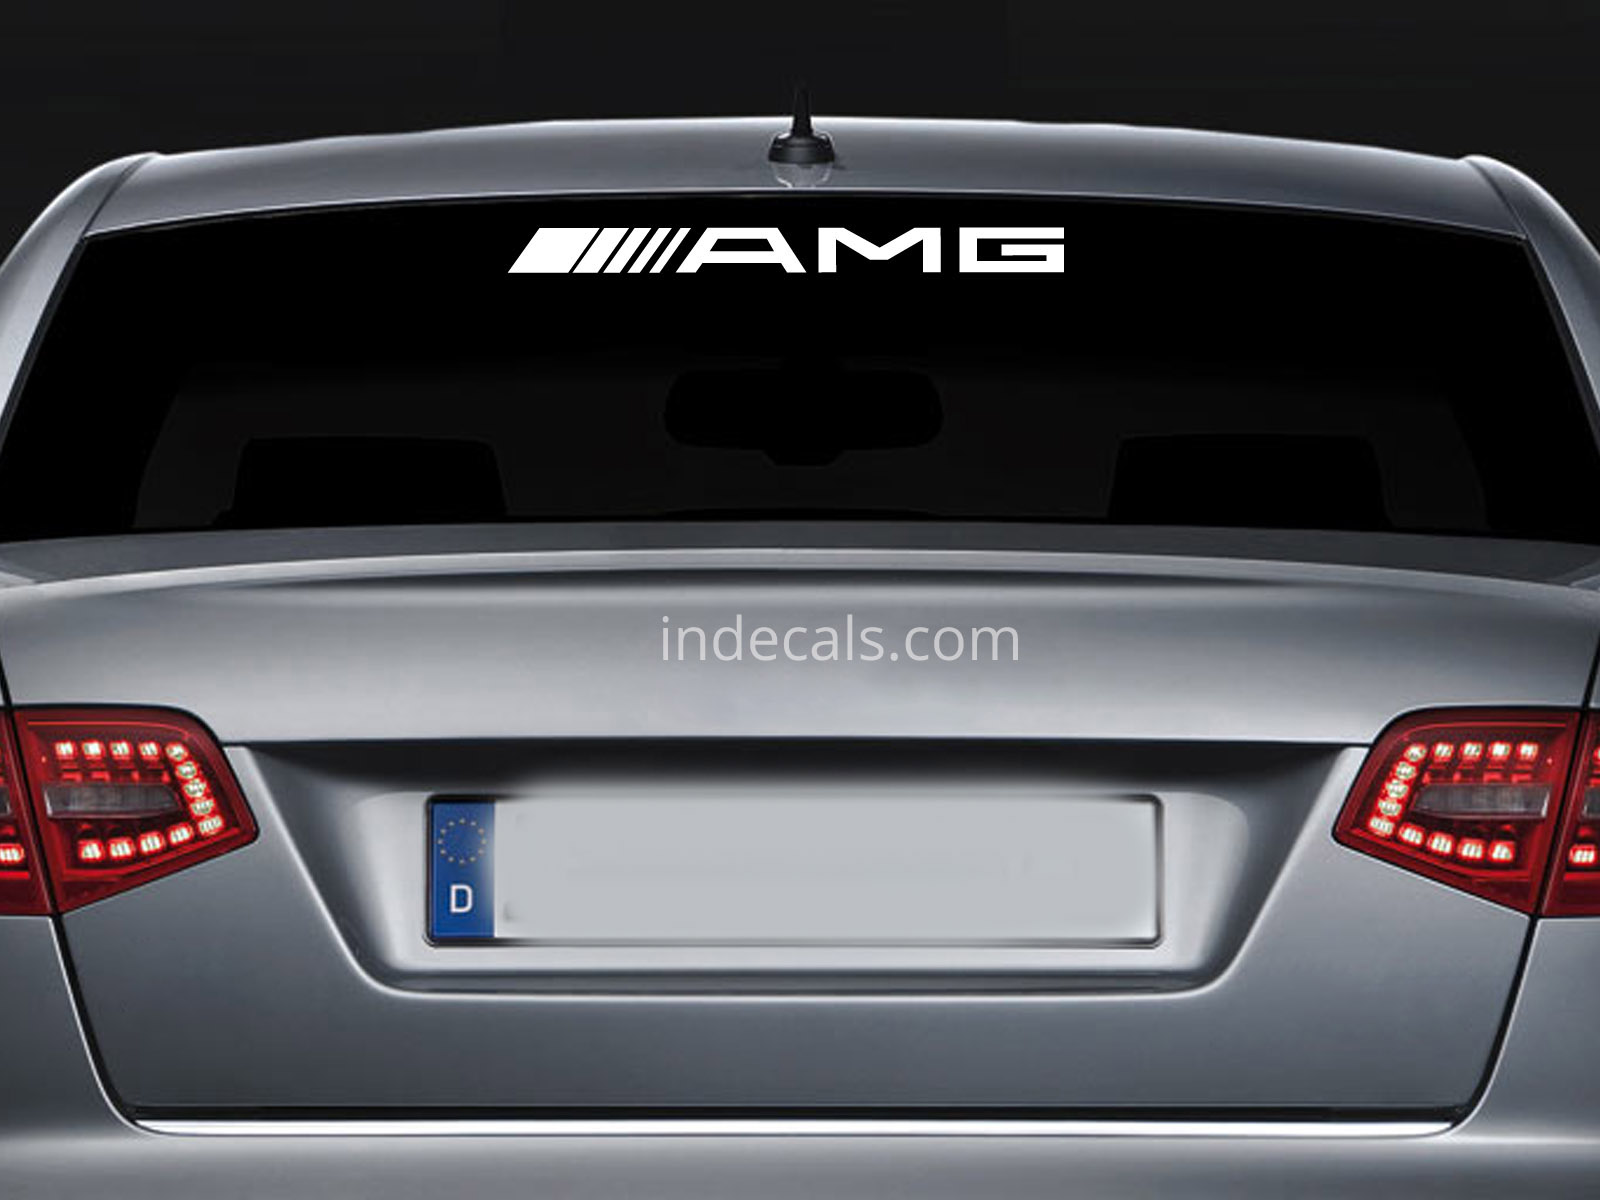 1 x AMG Sticker for Windshield or Back Window - White